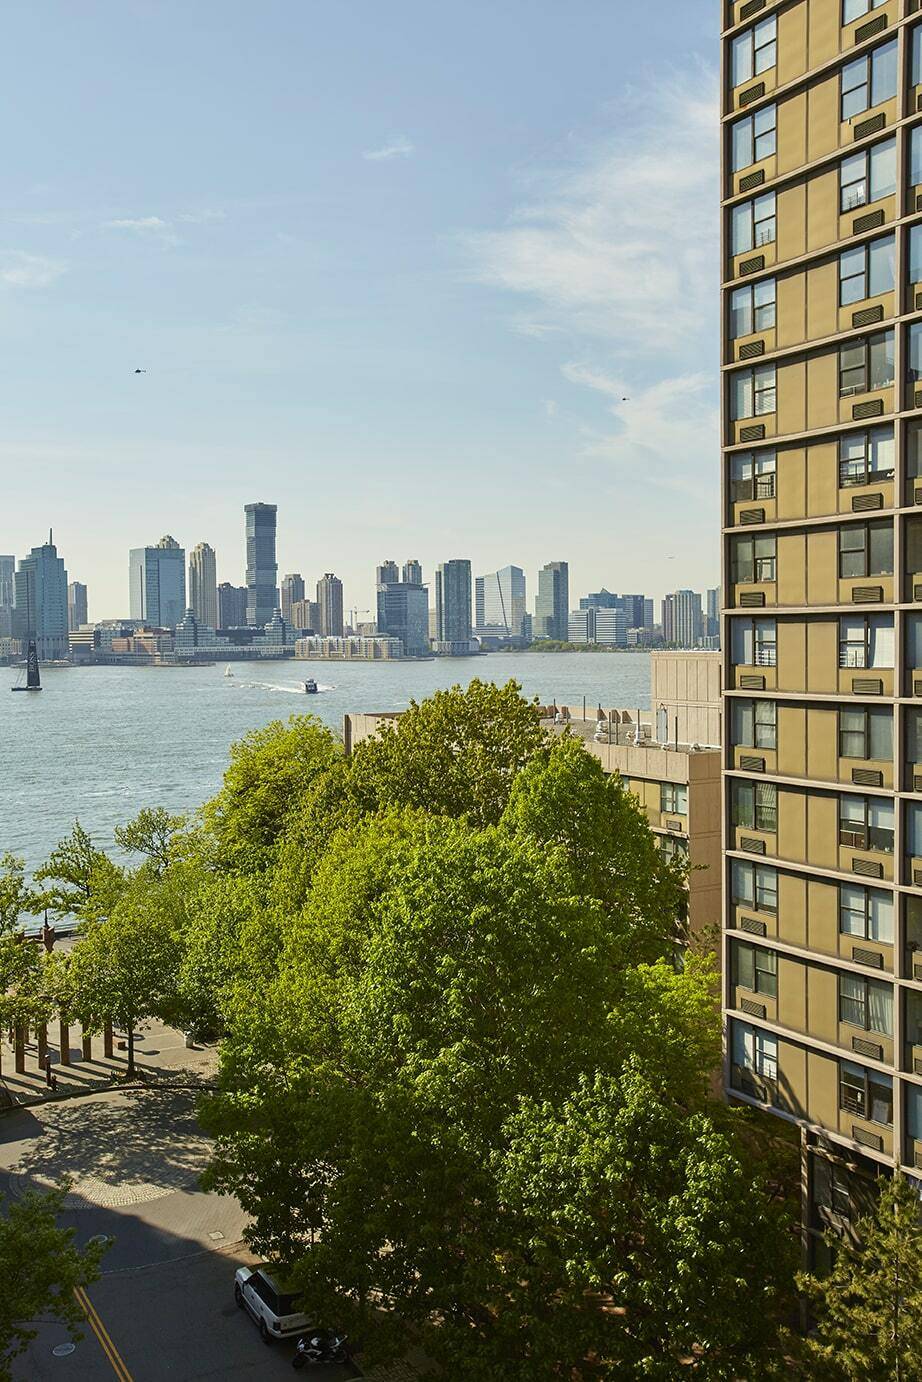 Your search for the perfect one bedroom apartment in Battery Park City has ended.